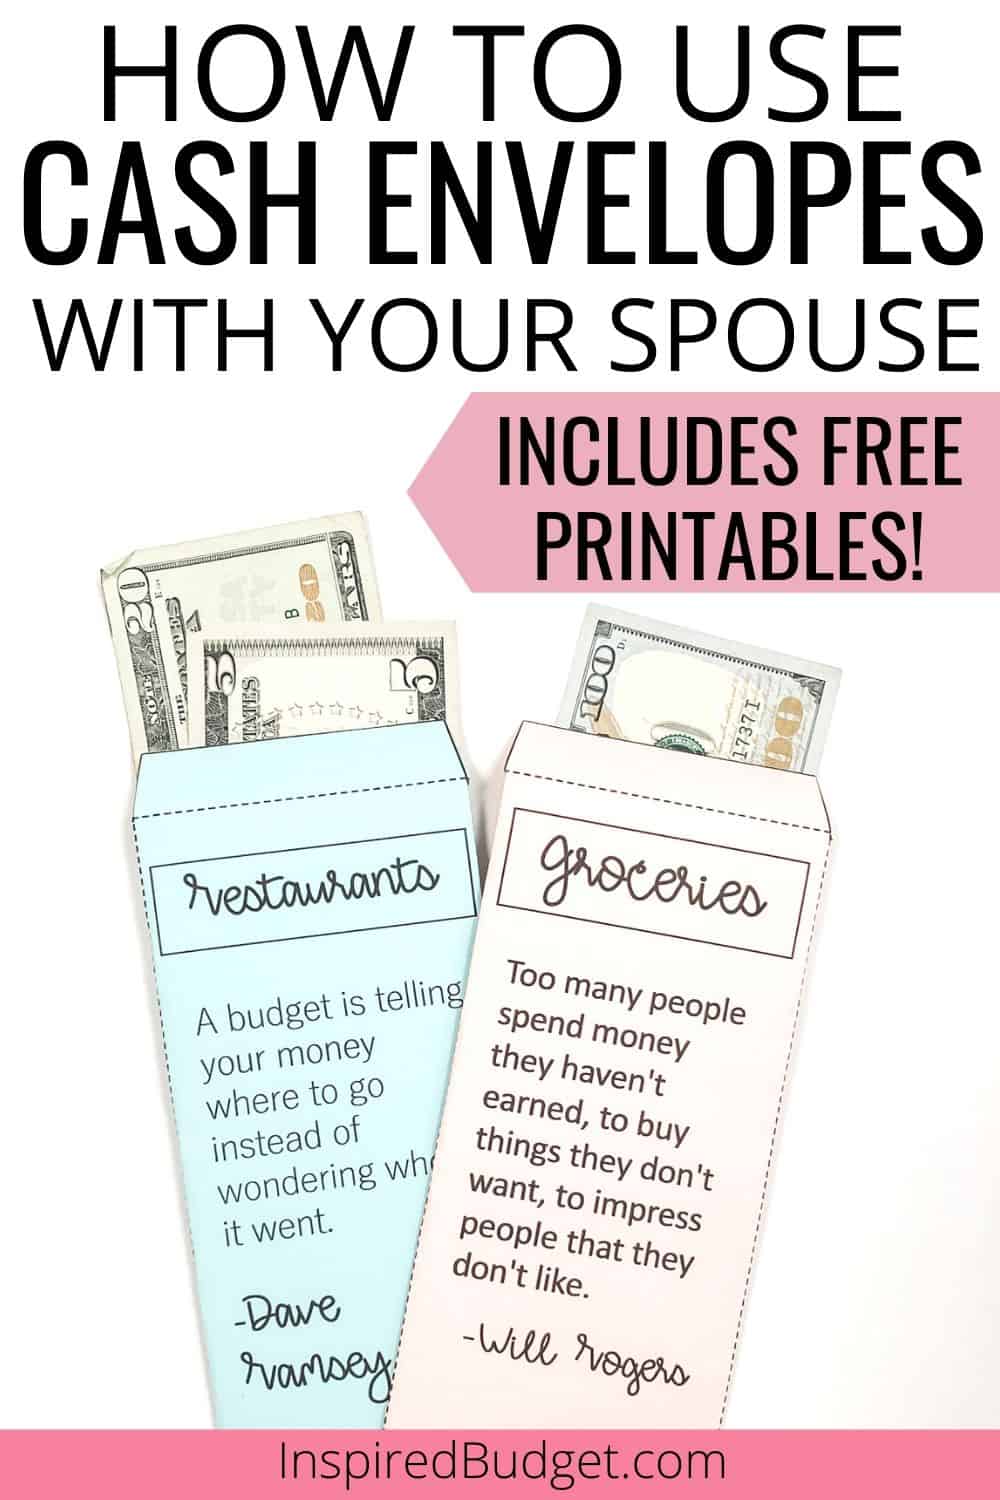 Ready to use the cash envelope system but aren't sure where you and your spouse should start? No worries! Learn exactly how to use cash envelopes with a spouse. Includes FREE printable envelopes so you can get started today!